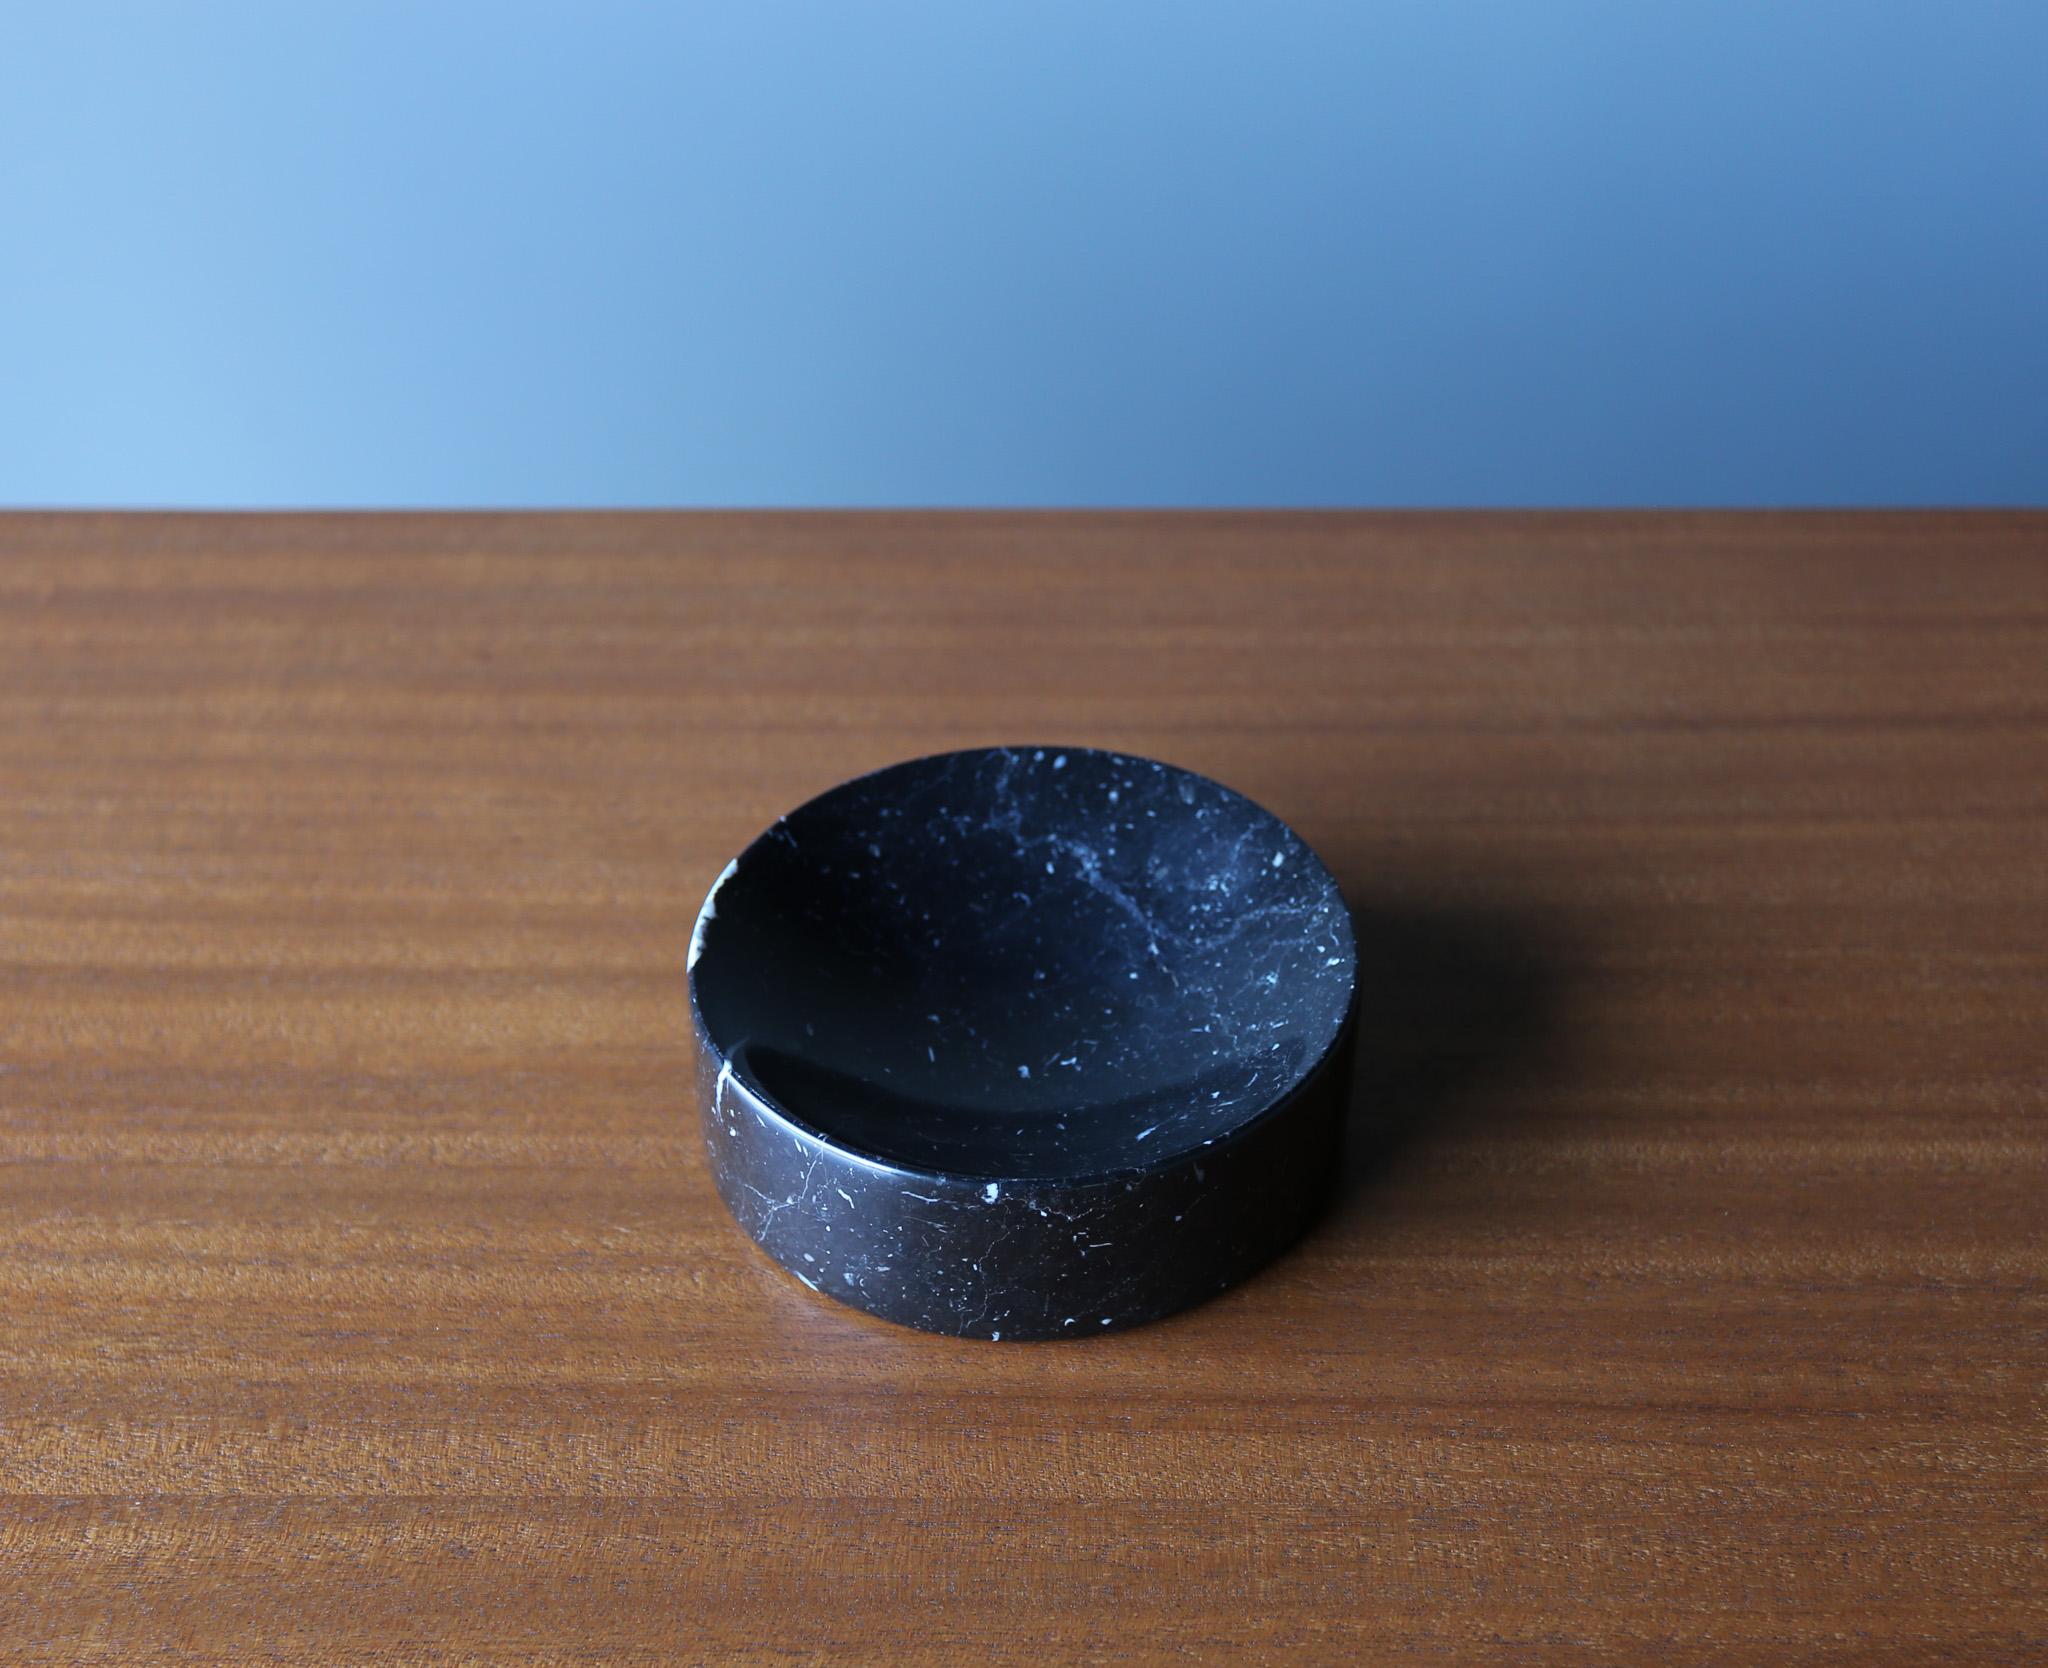 Peter Pepper Products Black Marble Bowl / Catchall, California, c.1975.  